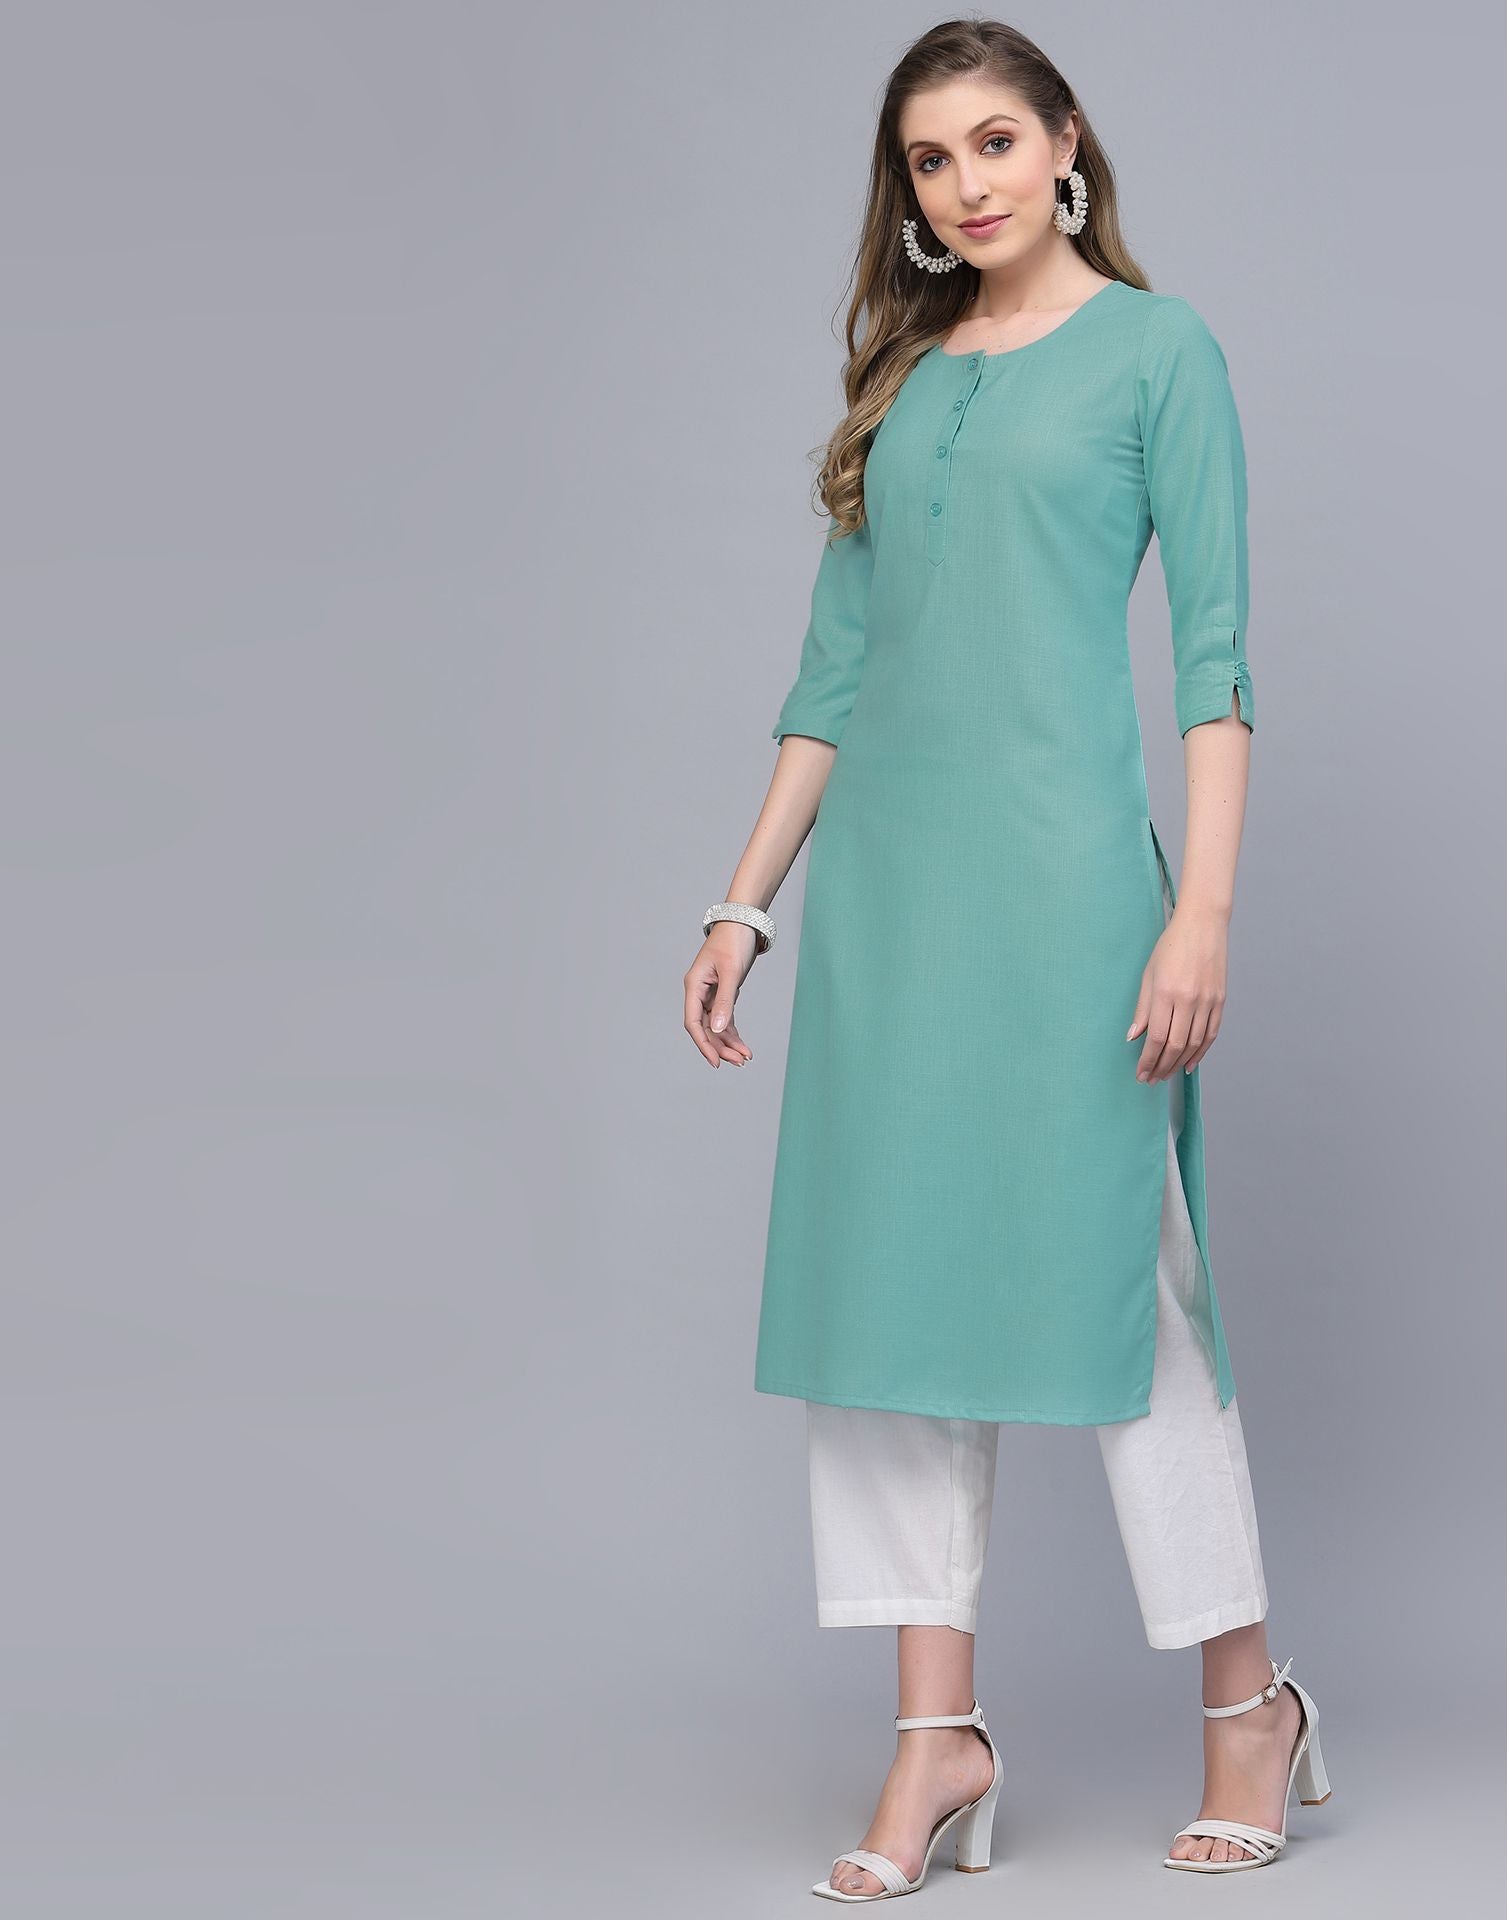 Light Green In Combination Traditional Embroidered Churidar Suit | Kameez  designs, Tight dress outfit, Dress materials